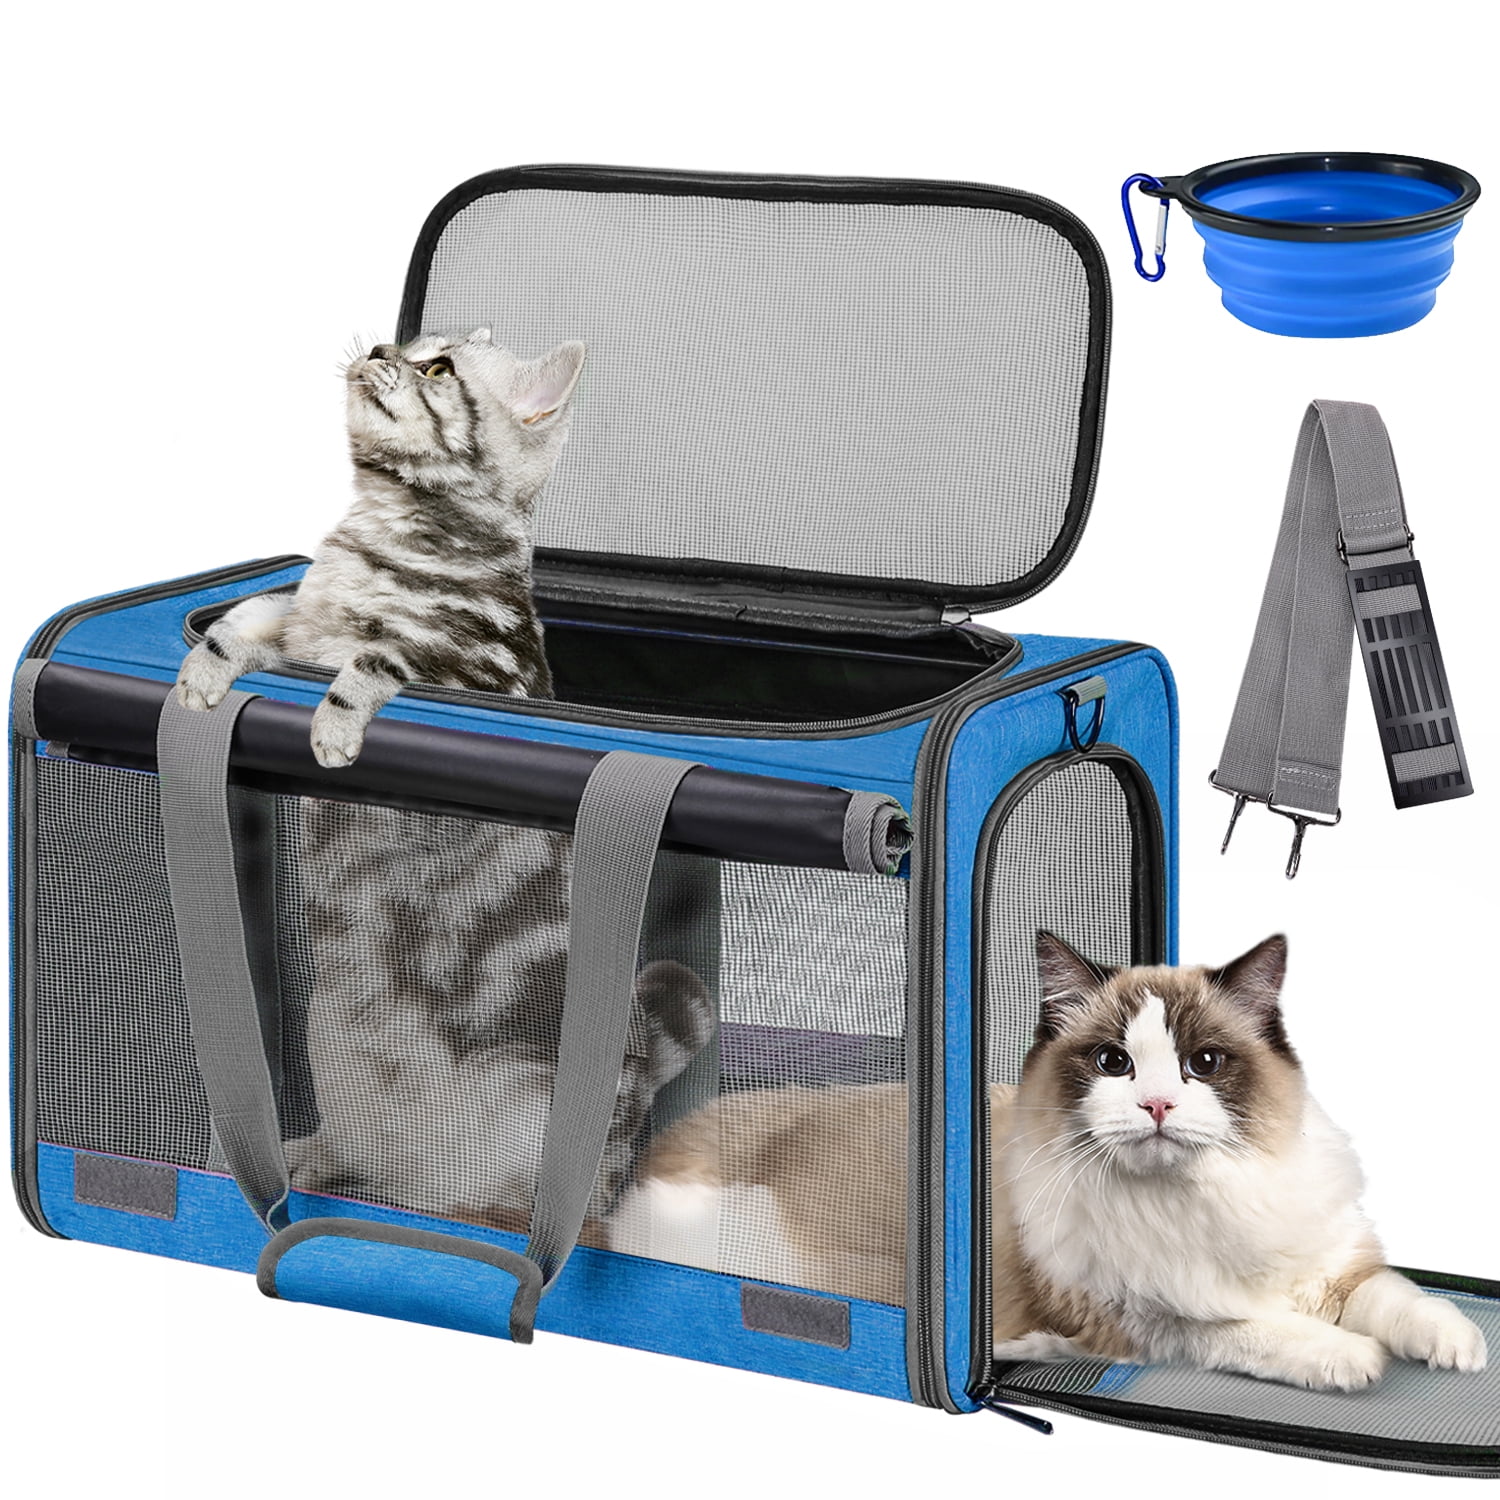 Pnimaund Large Cat Carrier for 2 Cats Under 25 Lbs,Soft Cat Carrier Airline  Approved with Upgrade Zippers and Identifiable Name Tags for Cats and